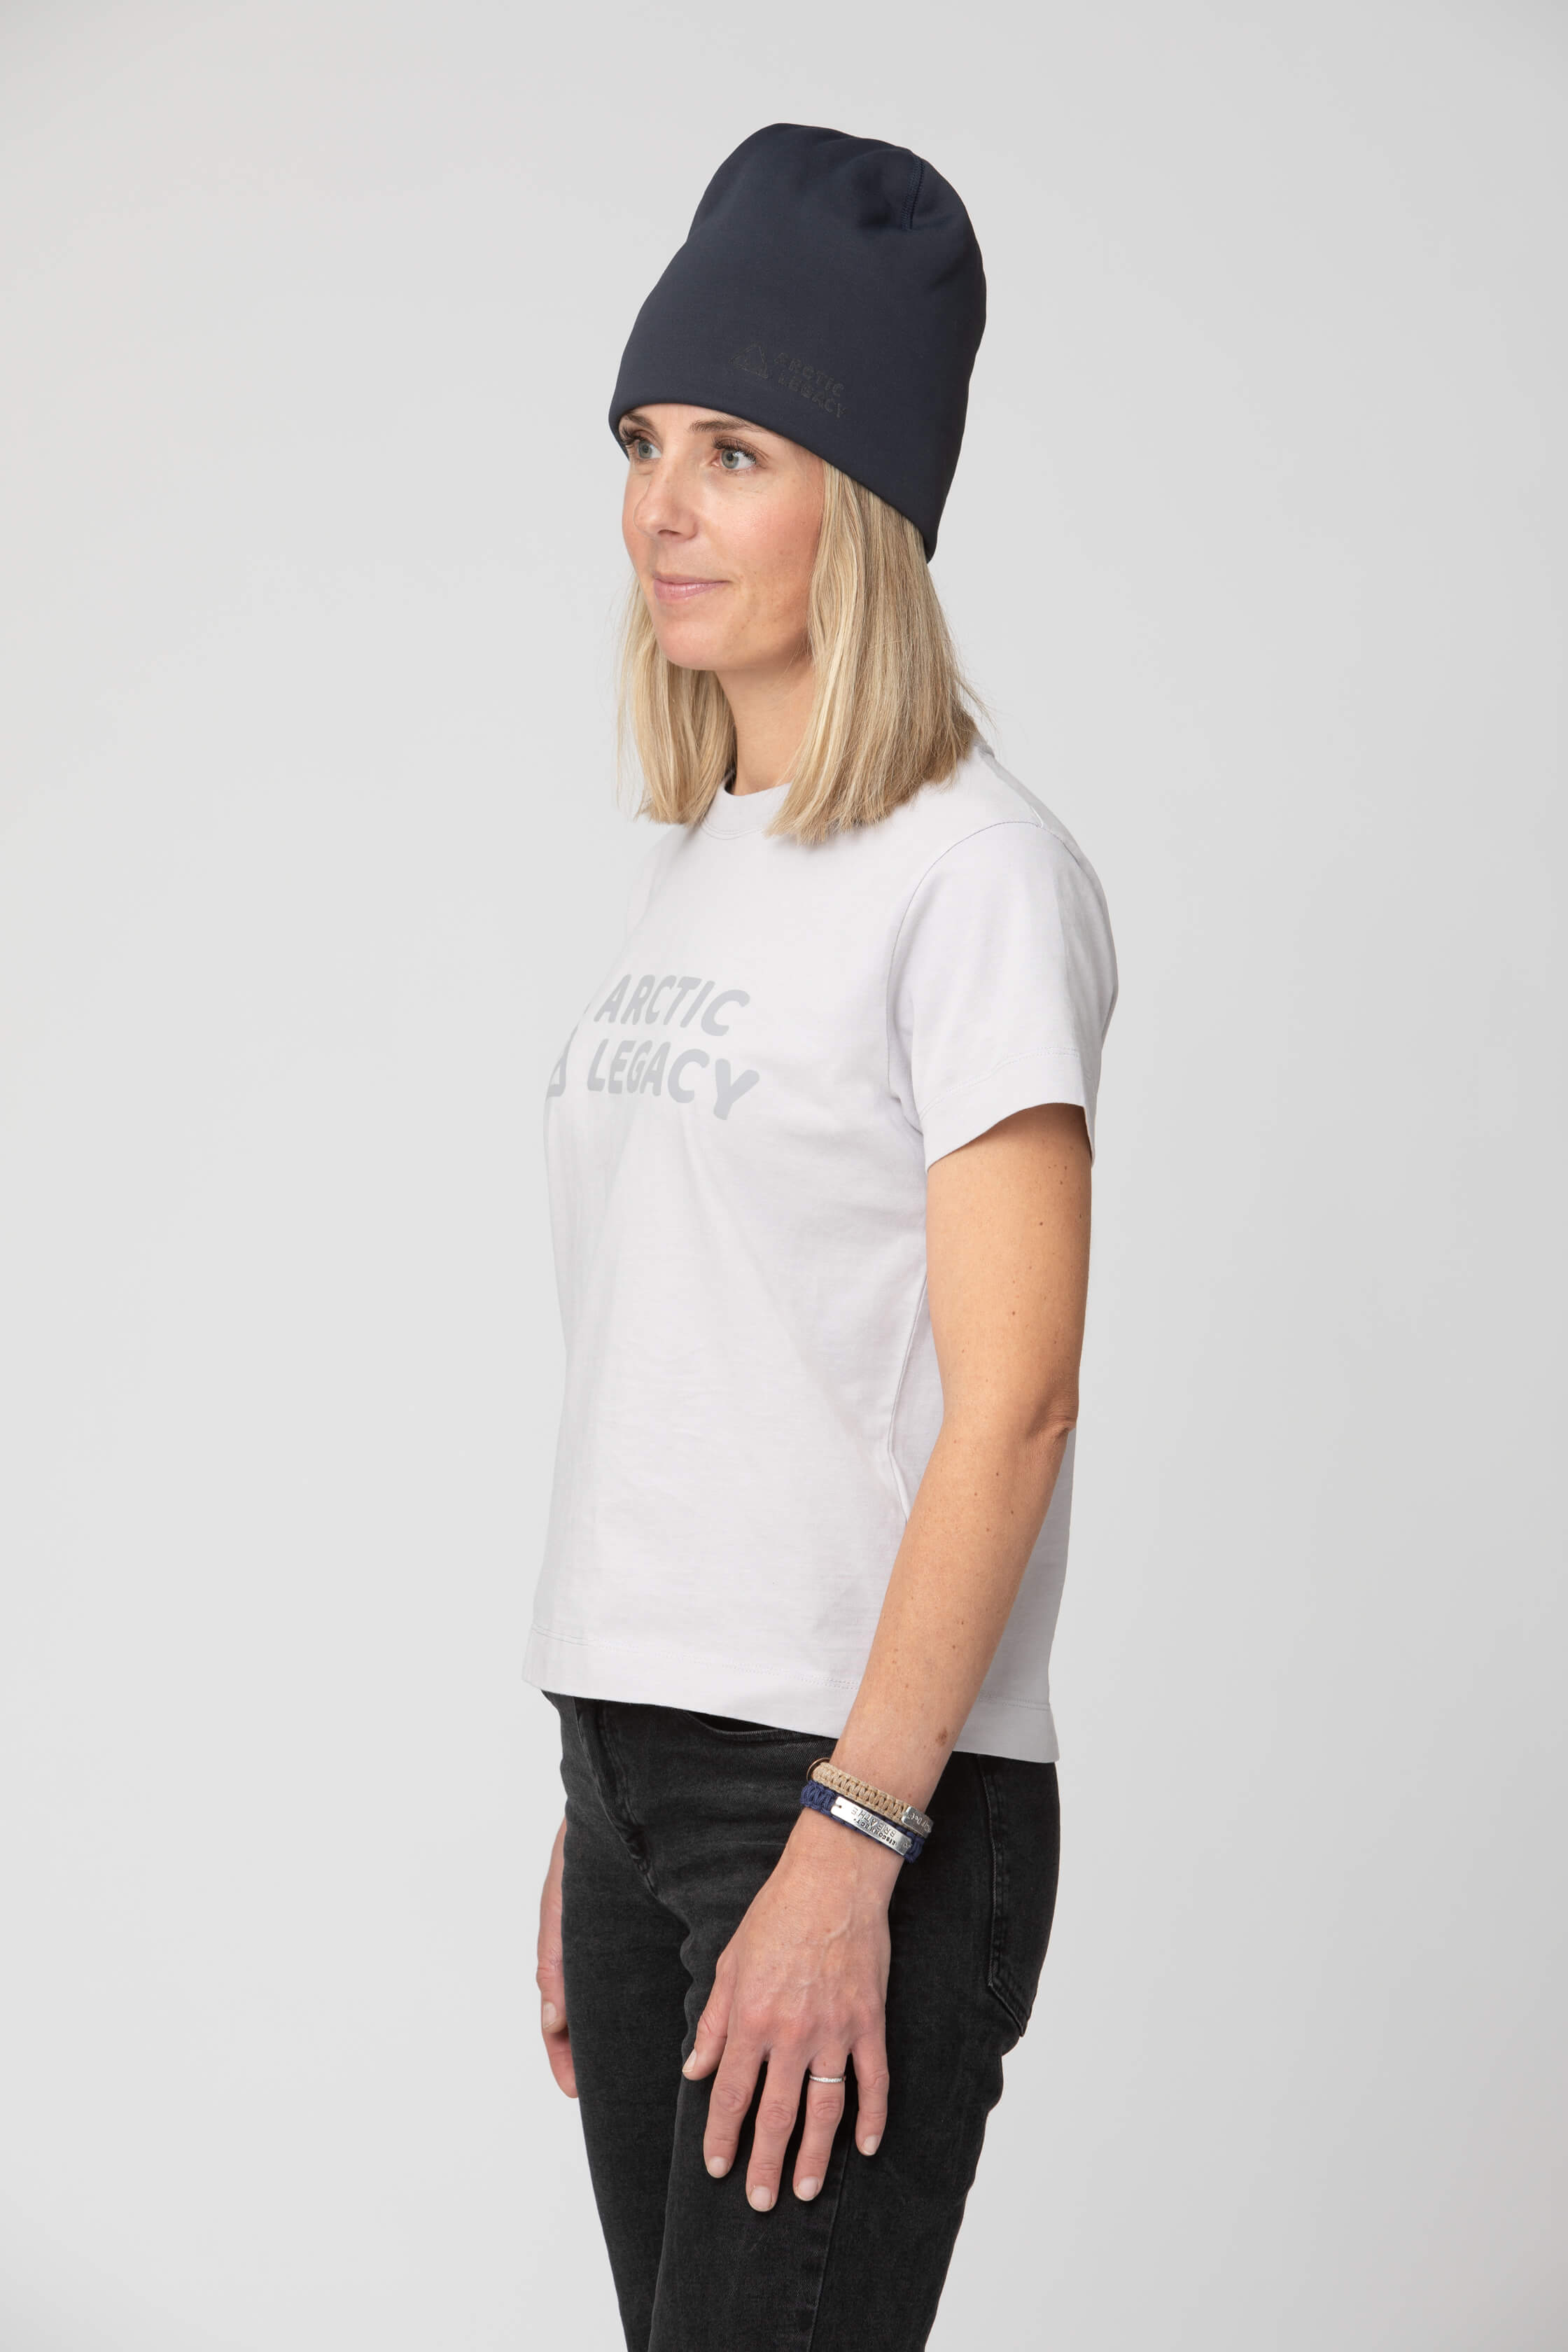 Women's grey t-shirt - side view of the Arctic Legacy Milo Organic Tee#color_northern-droplet